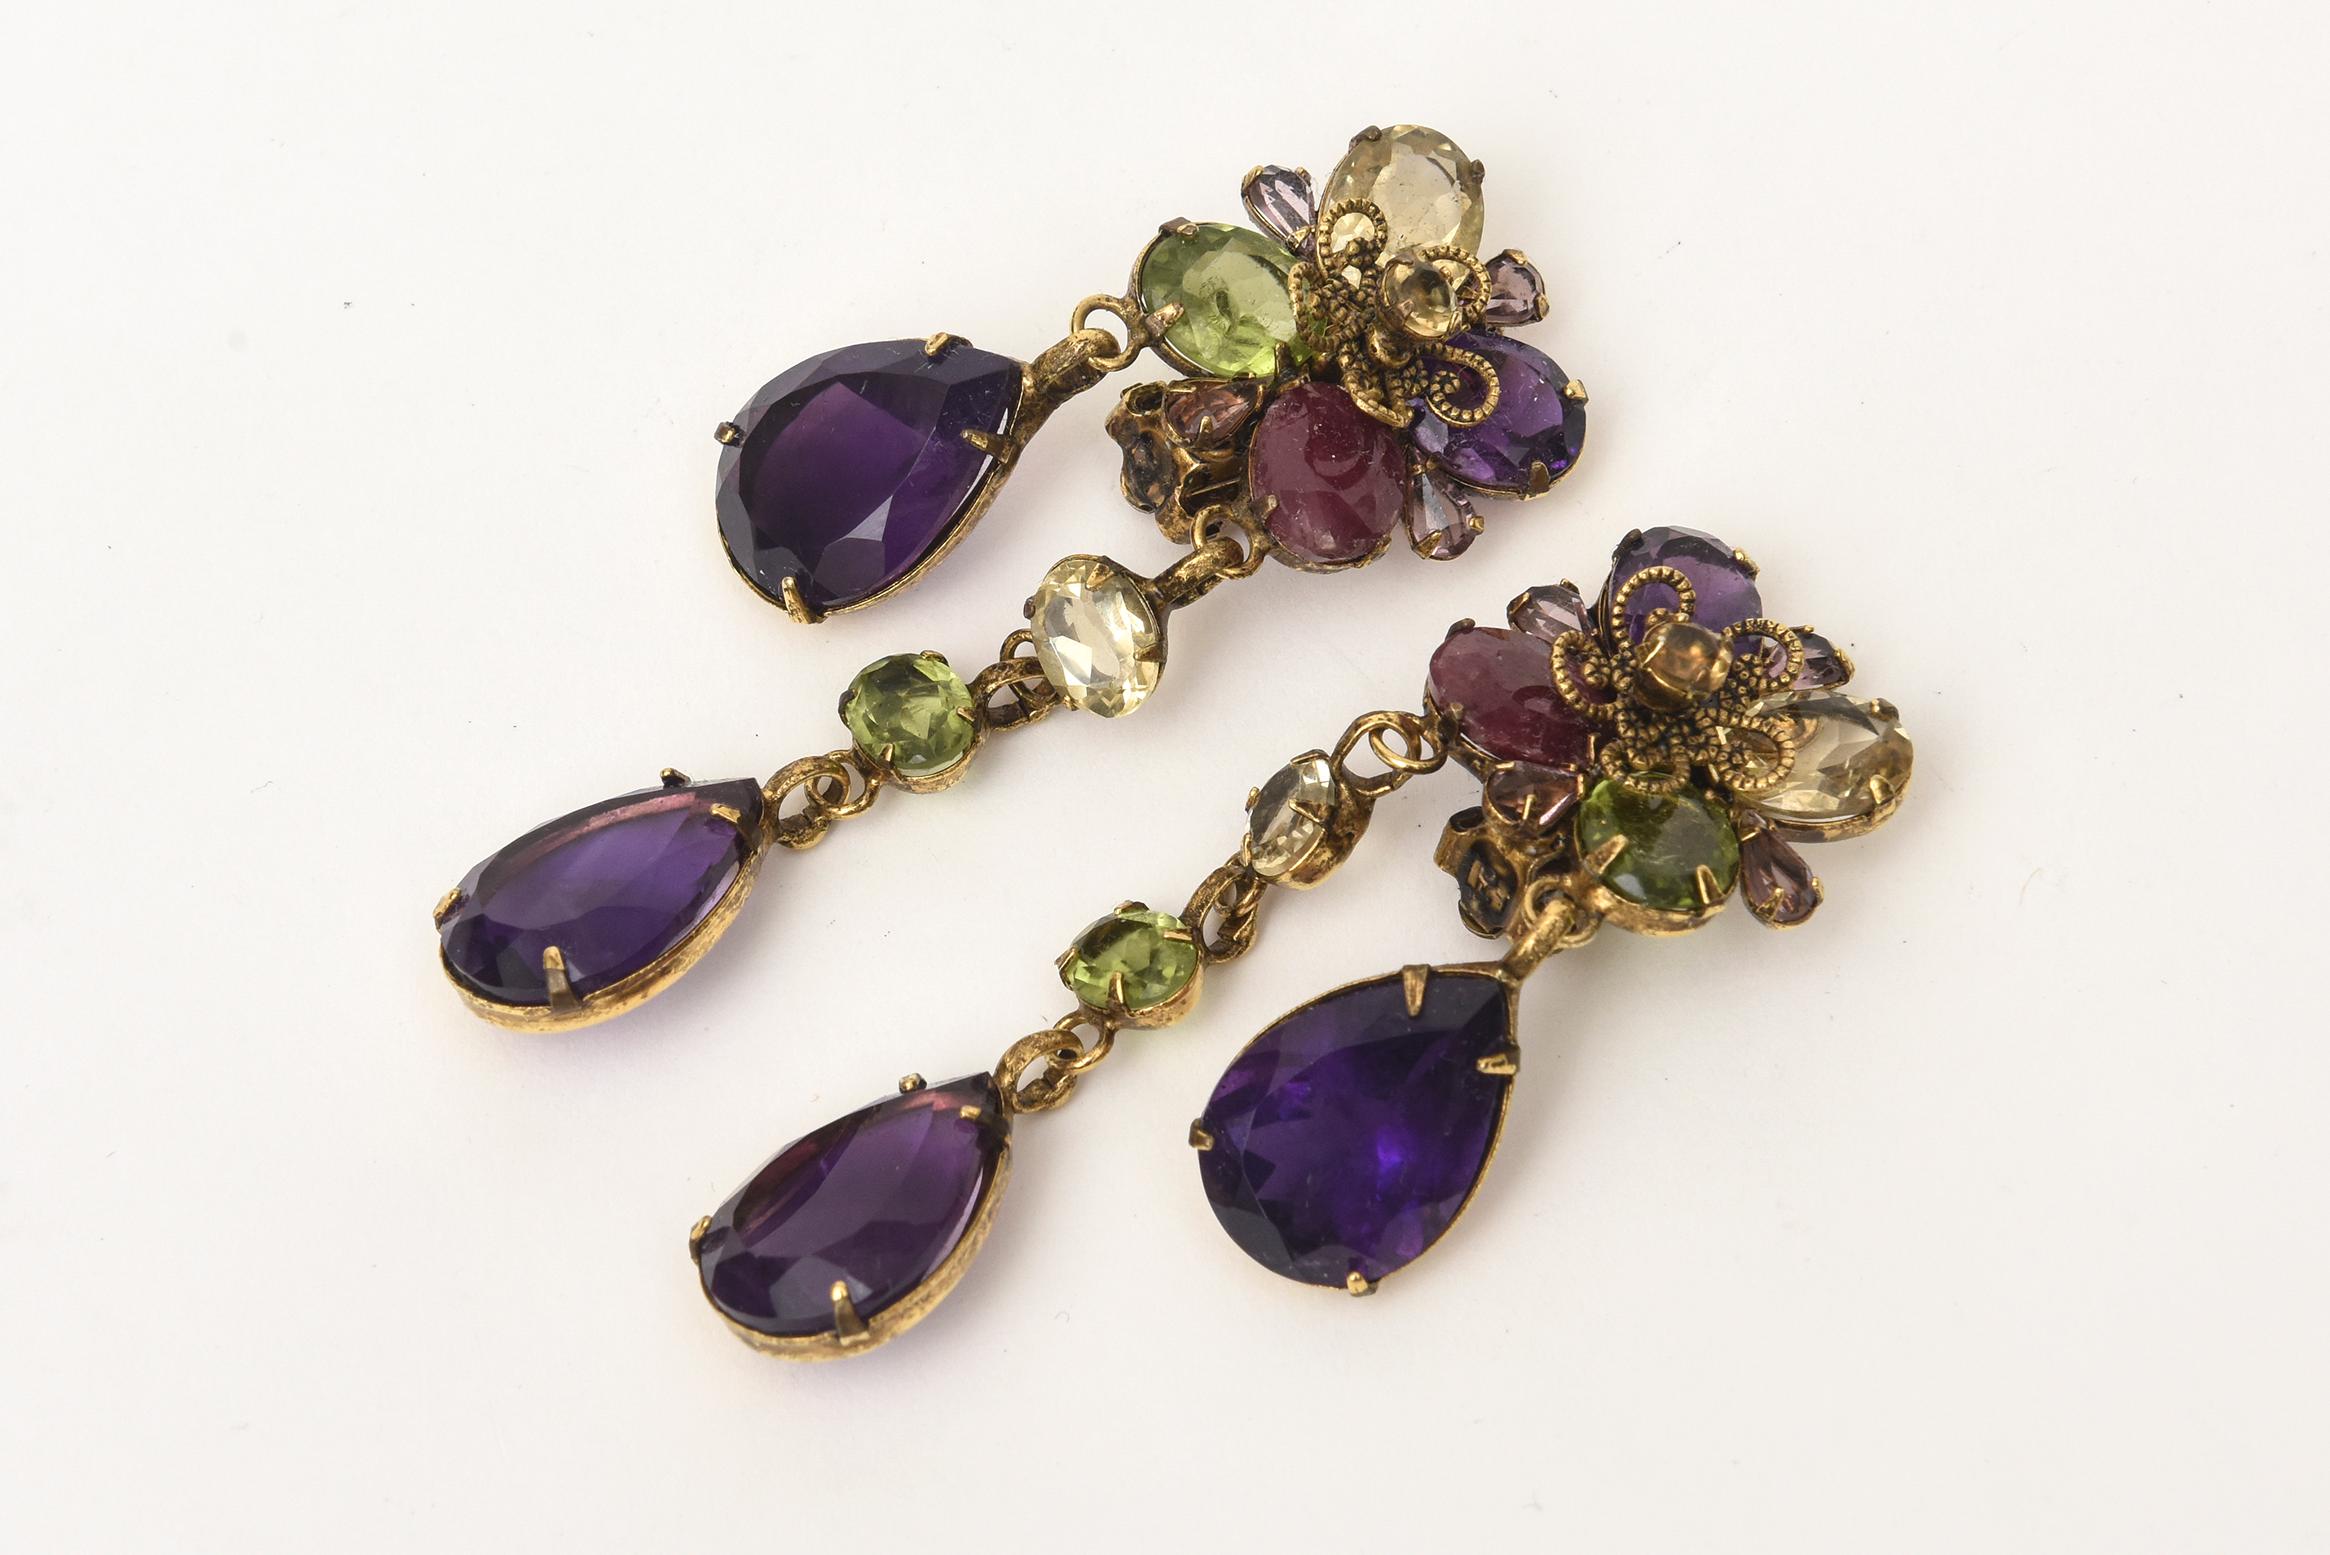 These lovely pair of dangle earrings are by C and D Jewelry. They used to work in the design studio of Iradj Moini in NYC. Actually these are more wearable than some of Iradj's work and more applicable. The colors are now so perfect for fall and